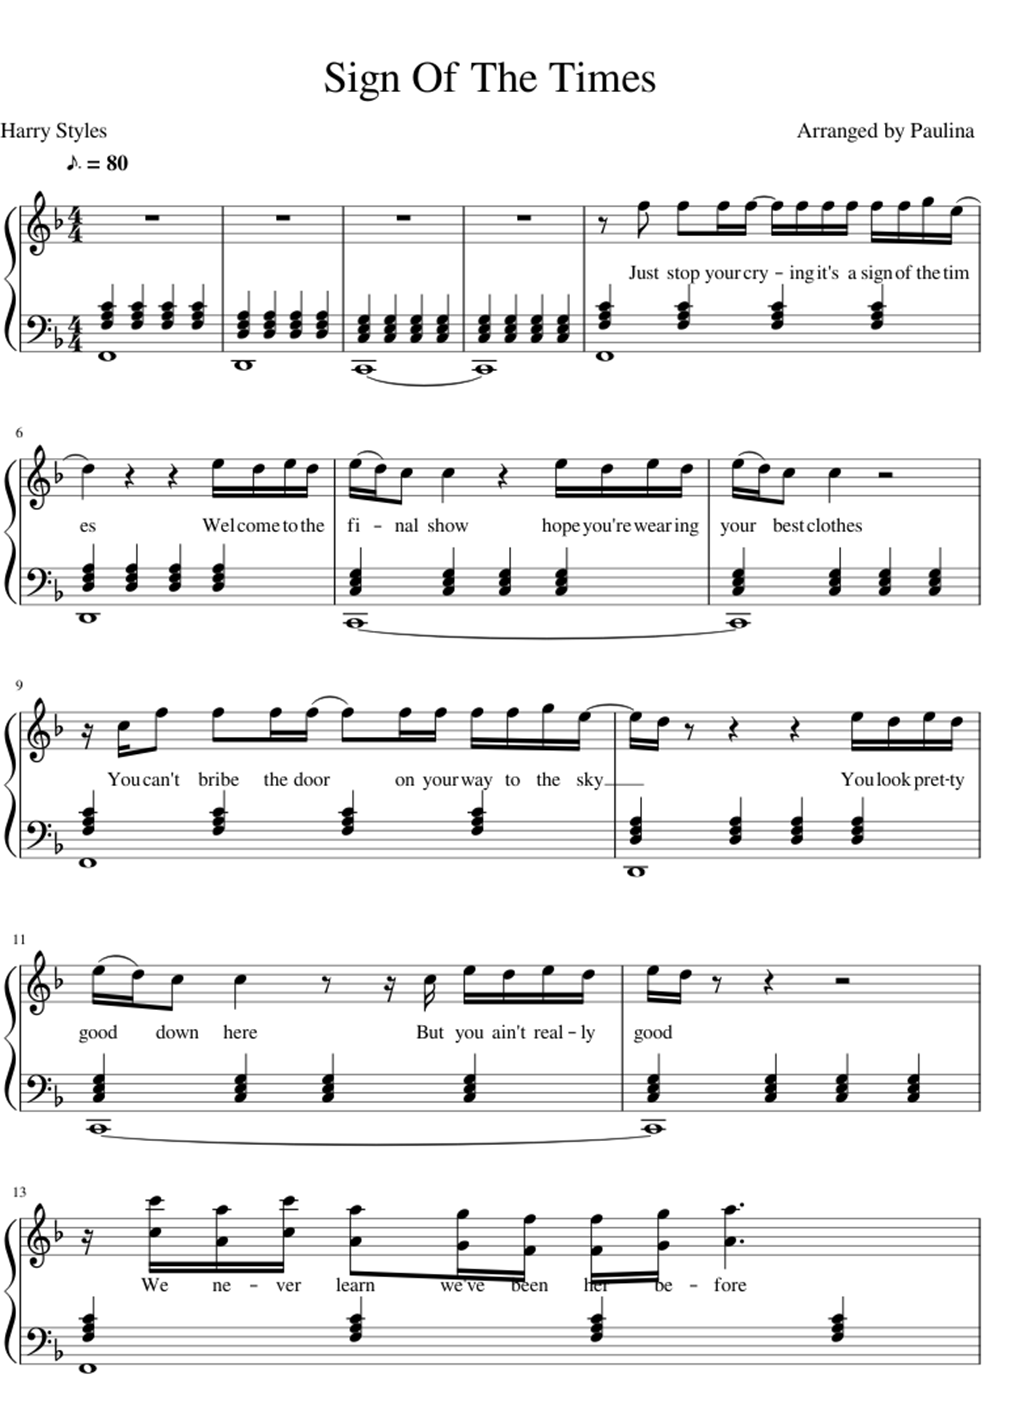 Sign of the time sheet music notes 1